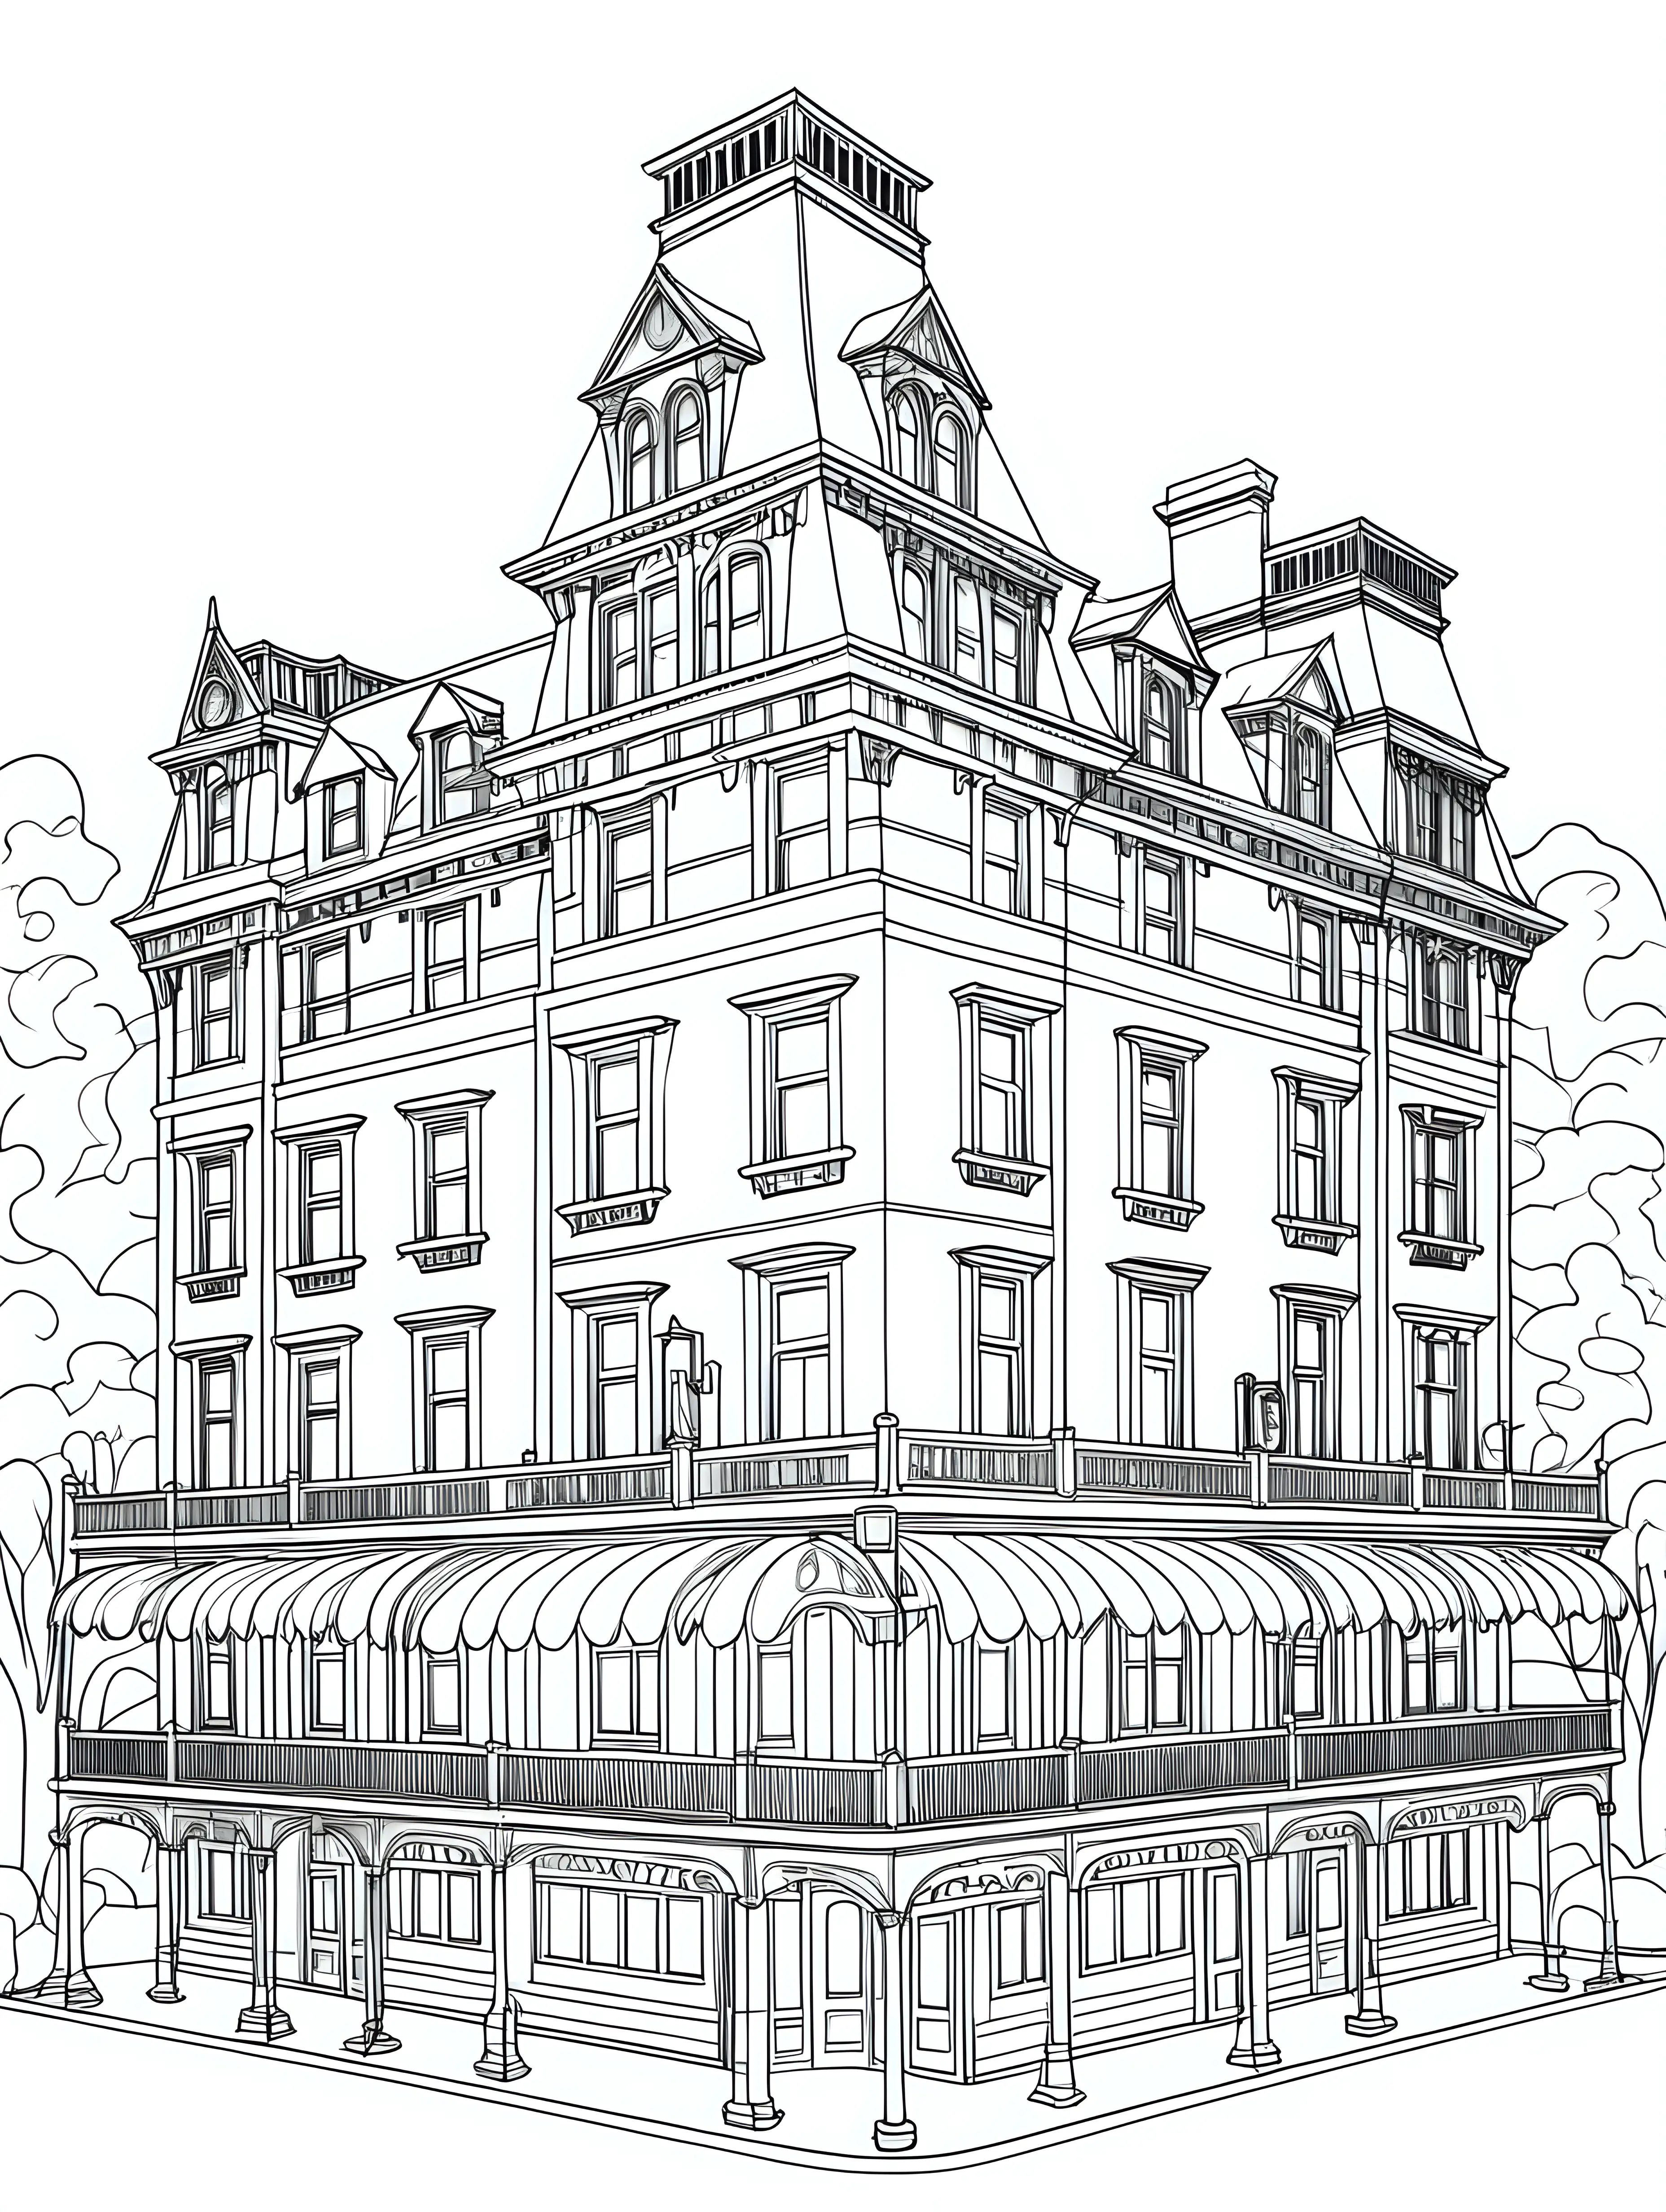 Create a simple line art coloring page featurinig a Victroian Hotel. Emphasize clean and minimalistic thin lines, utilizing a one-line drawing style for an elegant effect. Omit logos and letters from the design. Keep the details simple and minimal, employing a continuous line drawing technique. Ensure the overall aesthetic is minimalist, providing easy-to-color elements that capture the charm of a victorian hotel without unnecessary complexity. The coloring page should reflect the beauty of the scene with simplified details and a user-friendly design